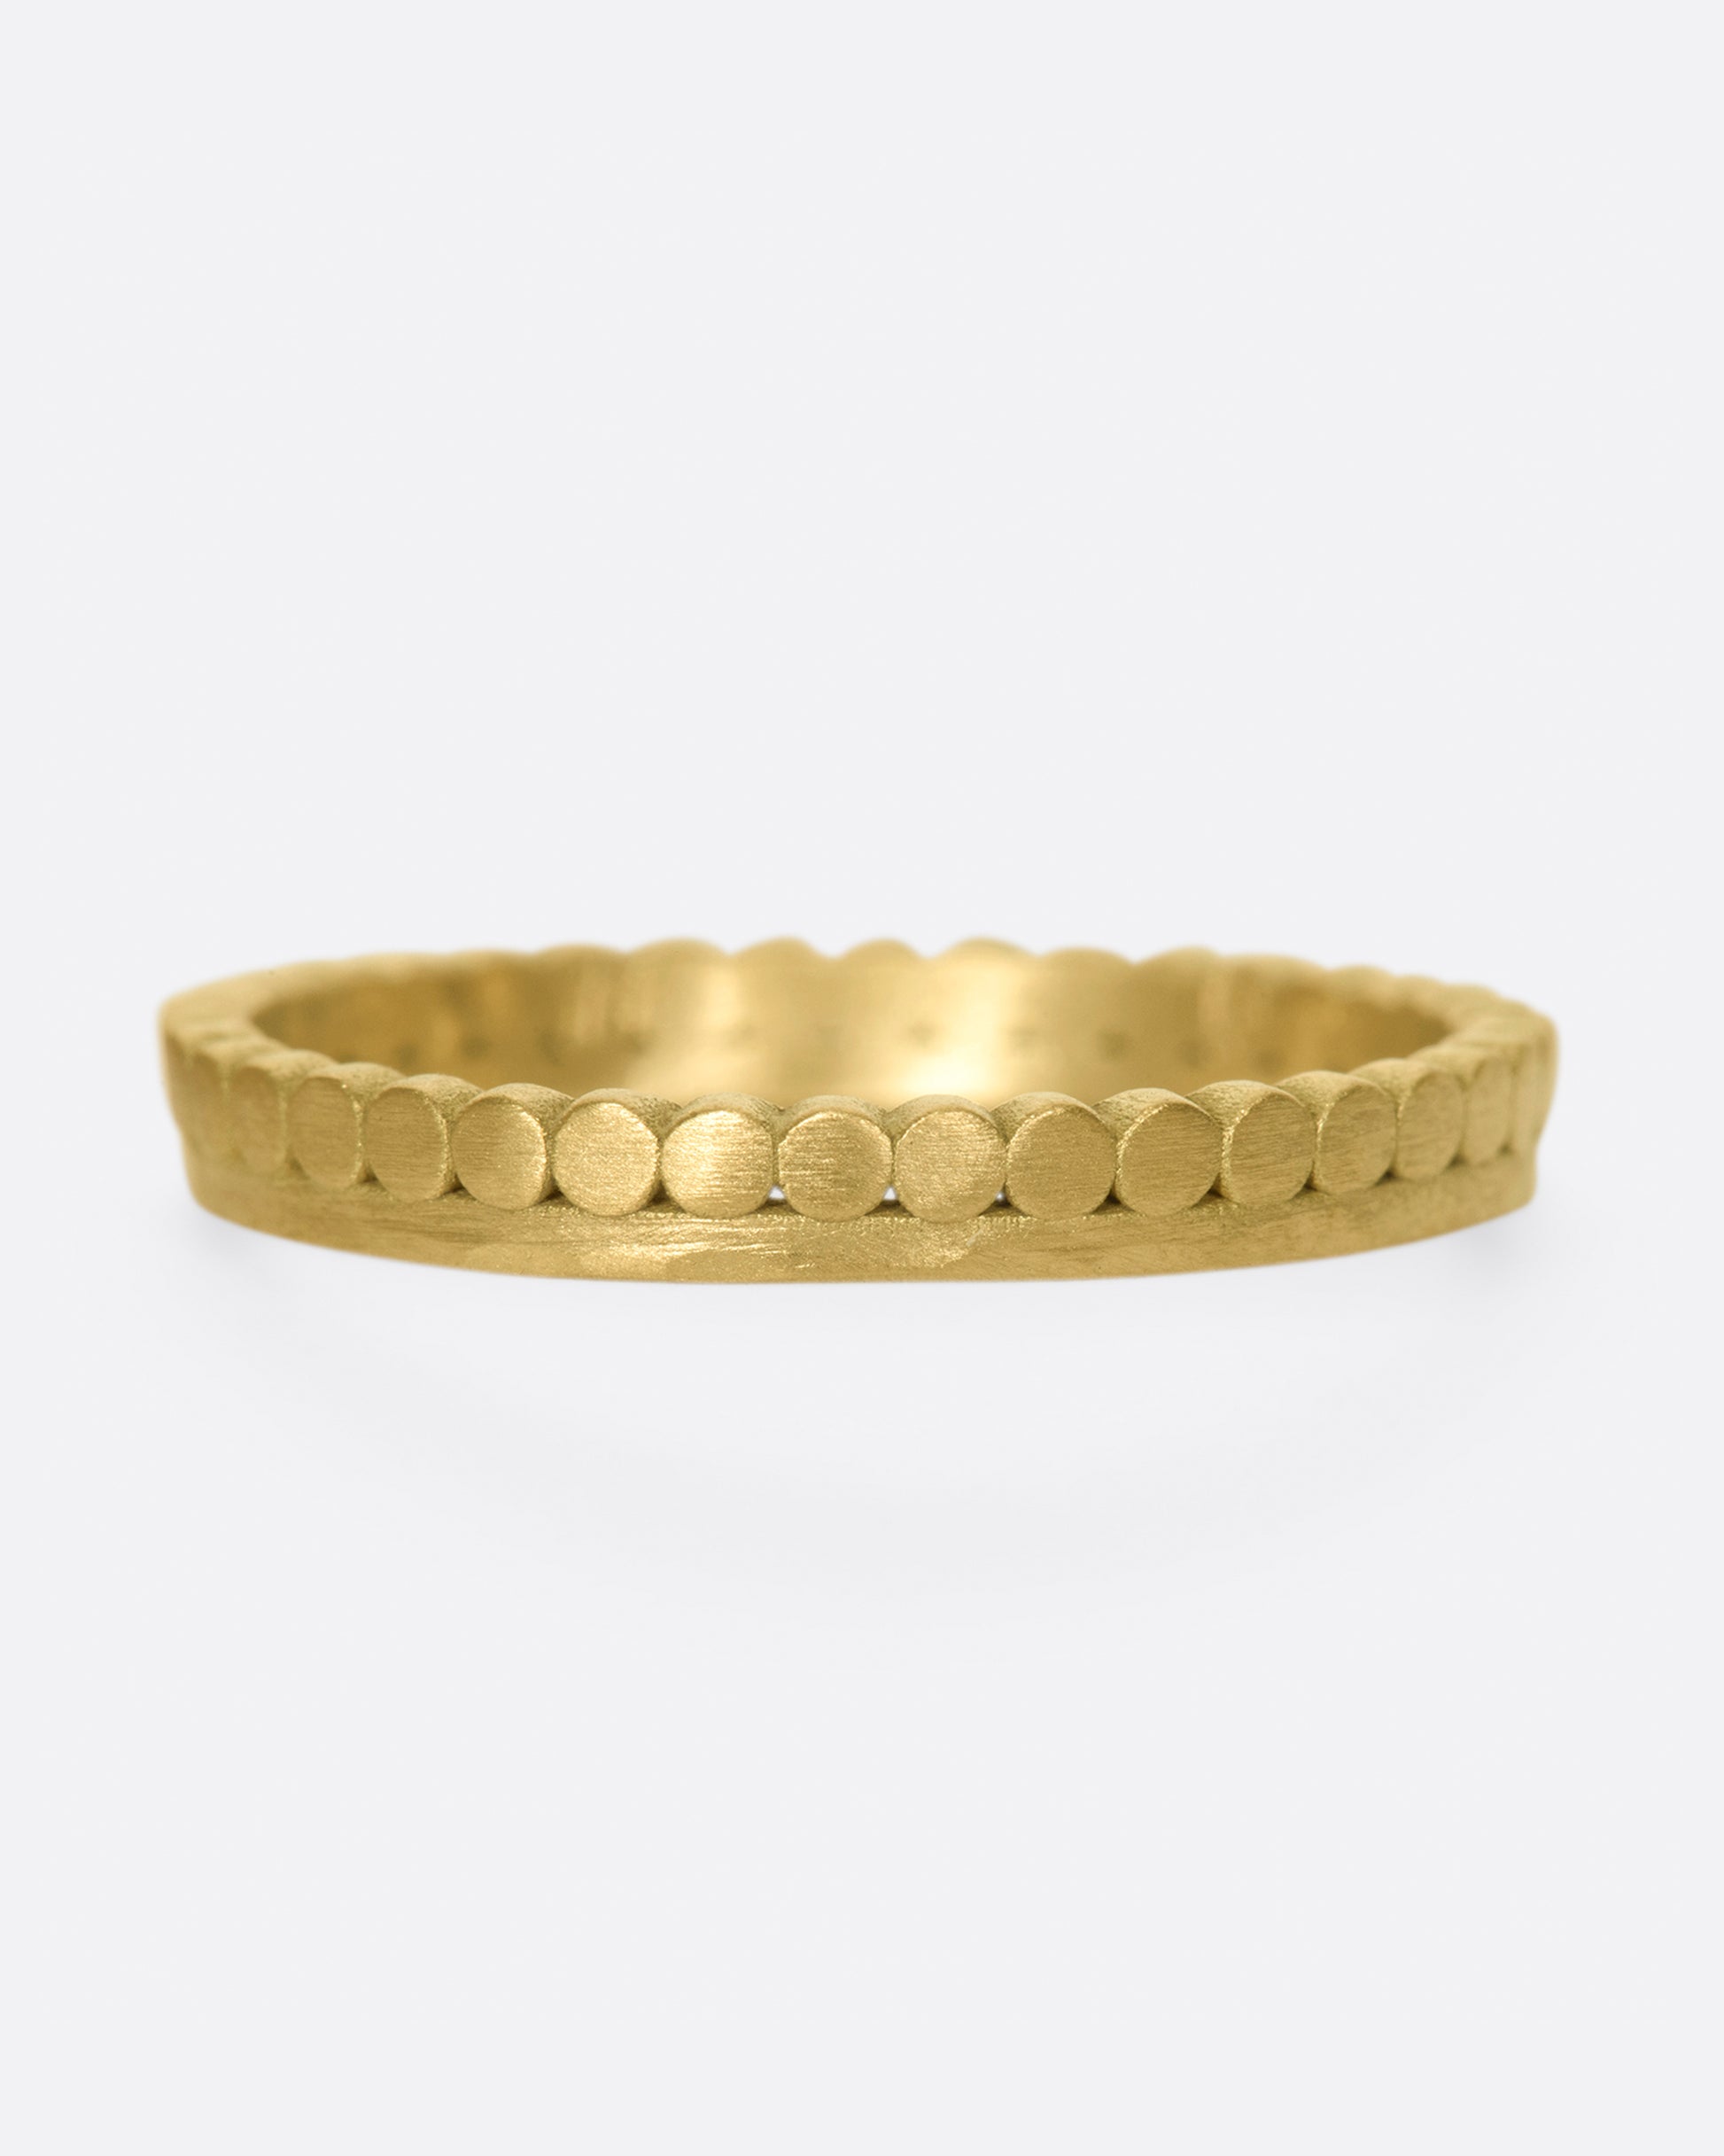 A matte gold band with dots encircling one side of the ring.